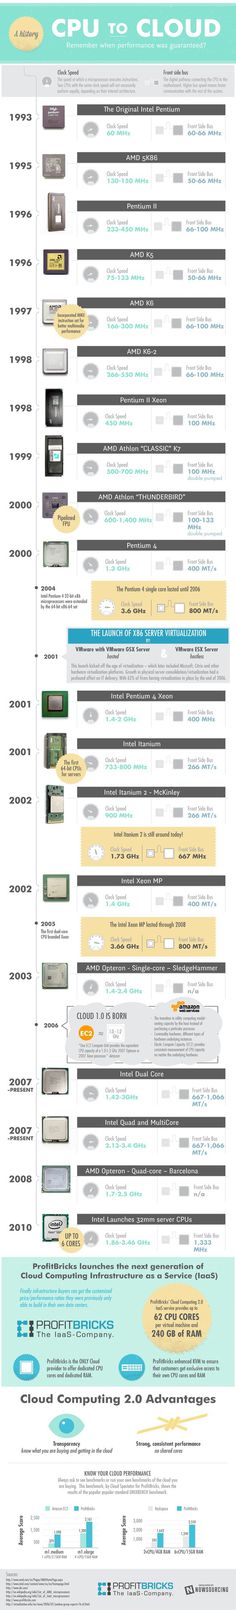 CPU to Cloud #infographic